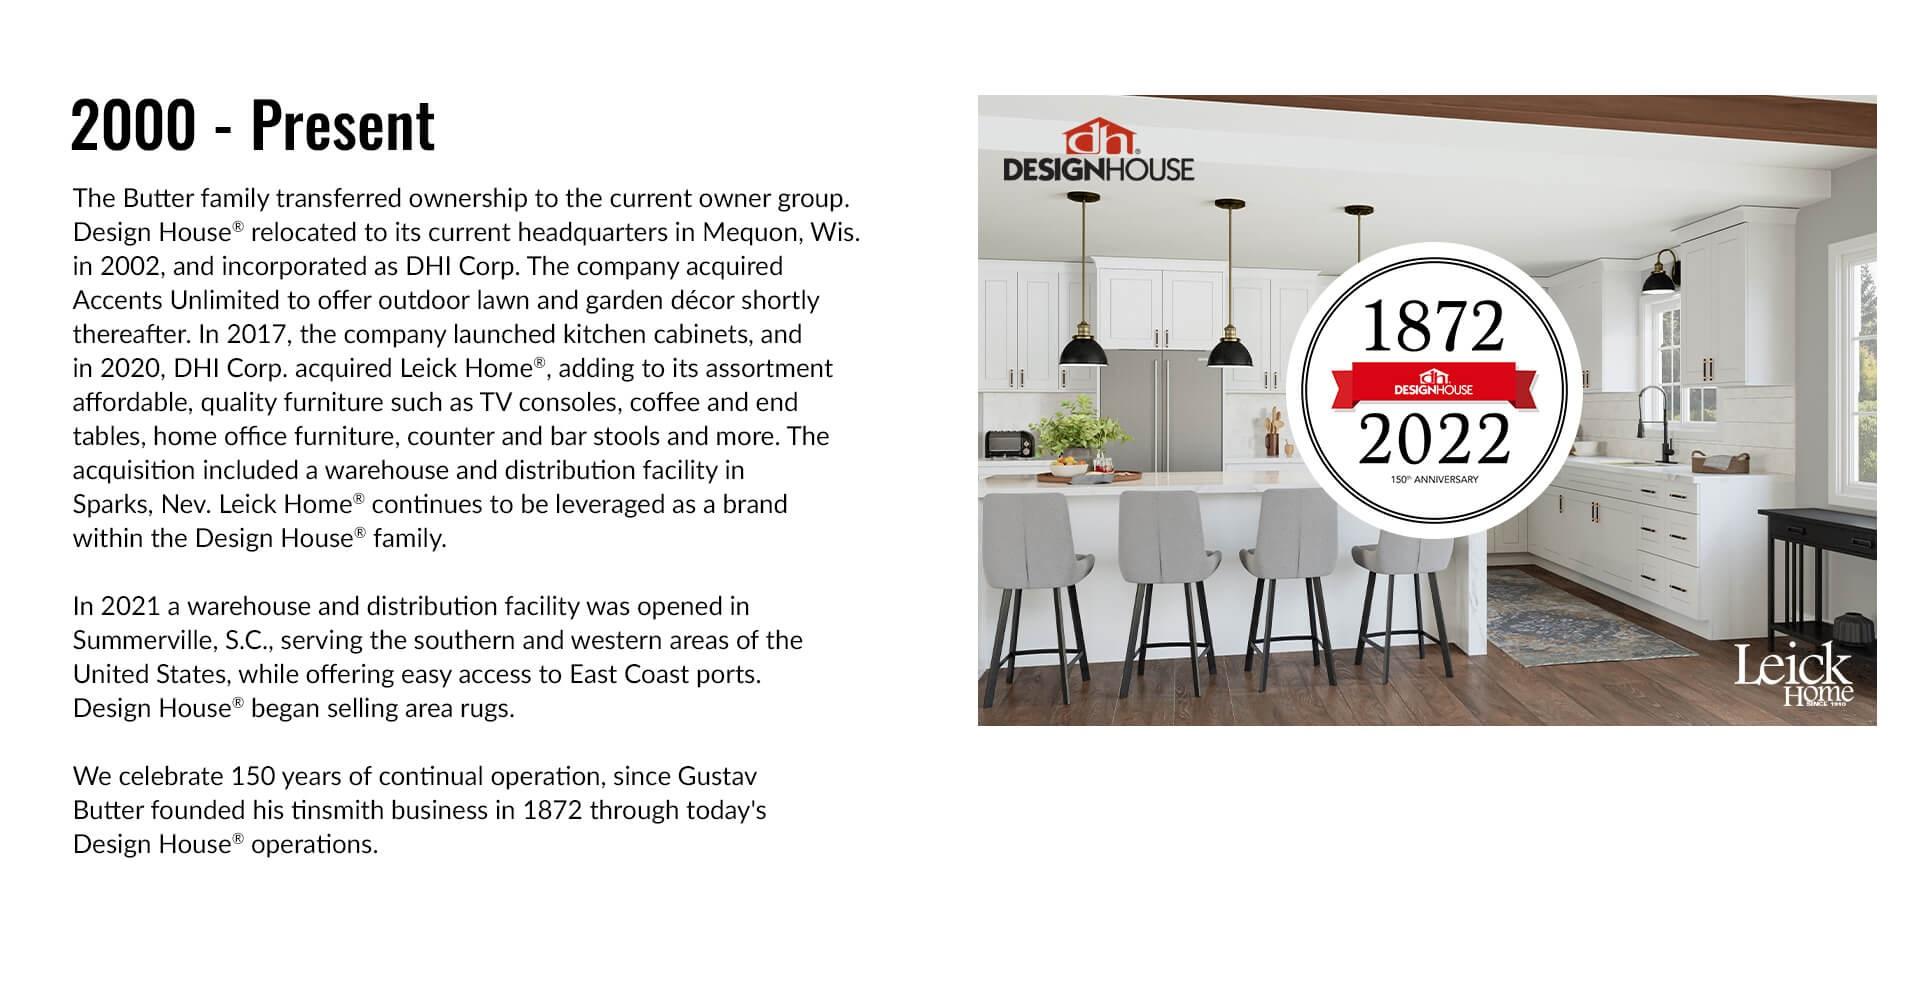 Design House relocated to its current location in Mequon, WI, made acquisitions and grew